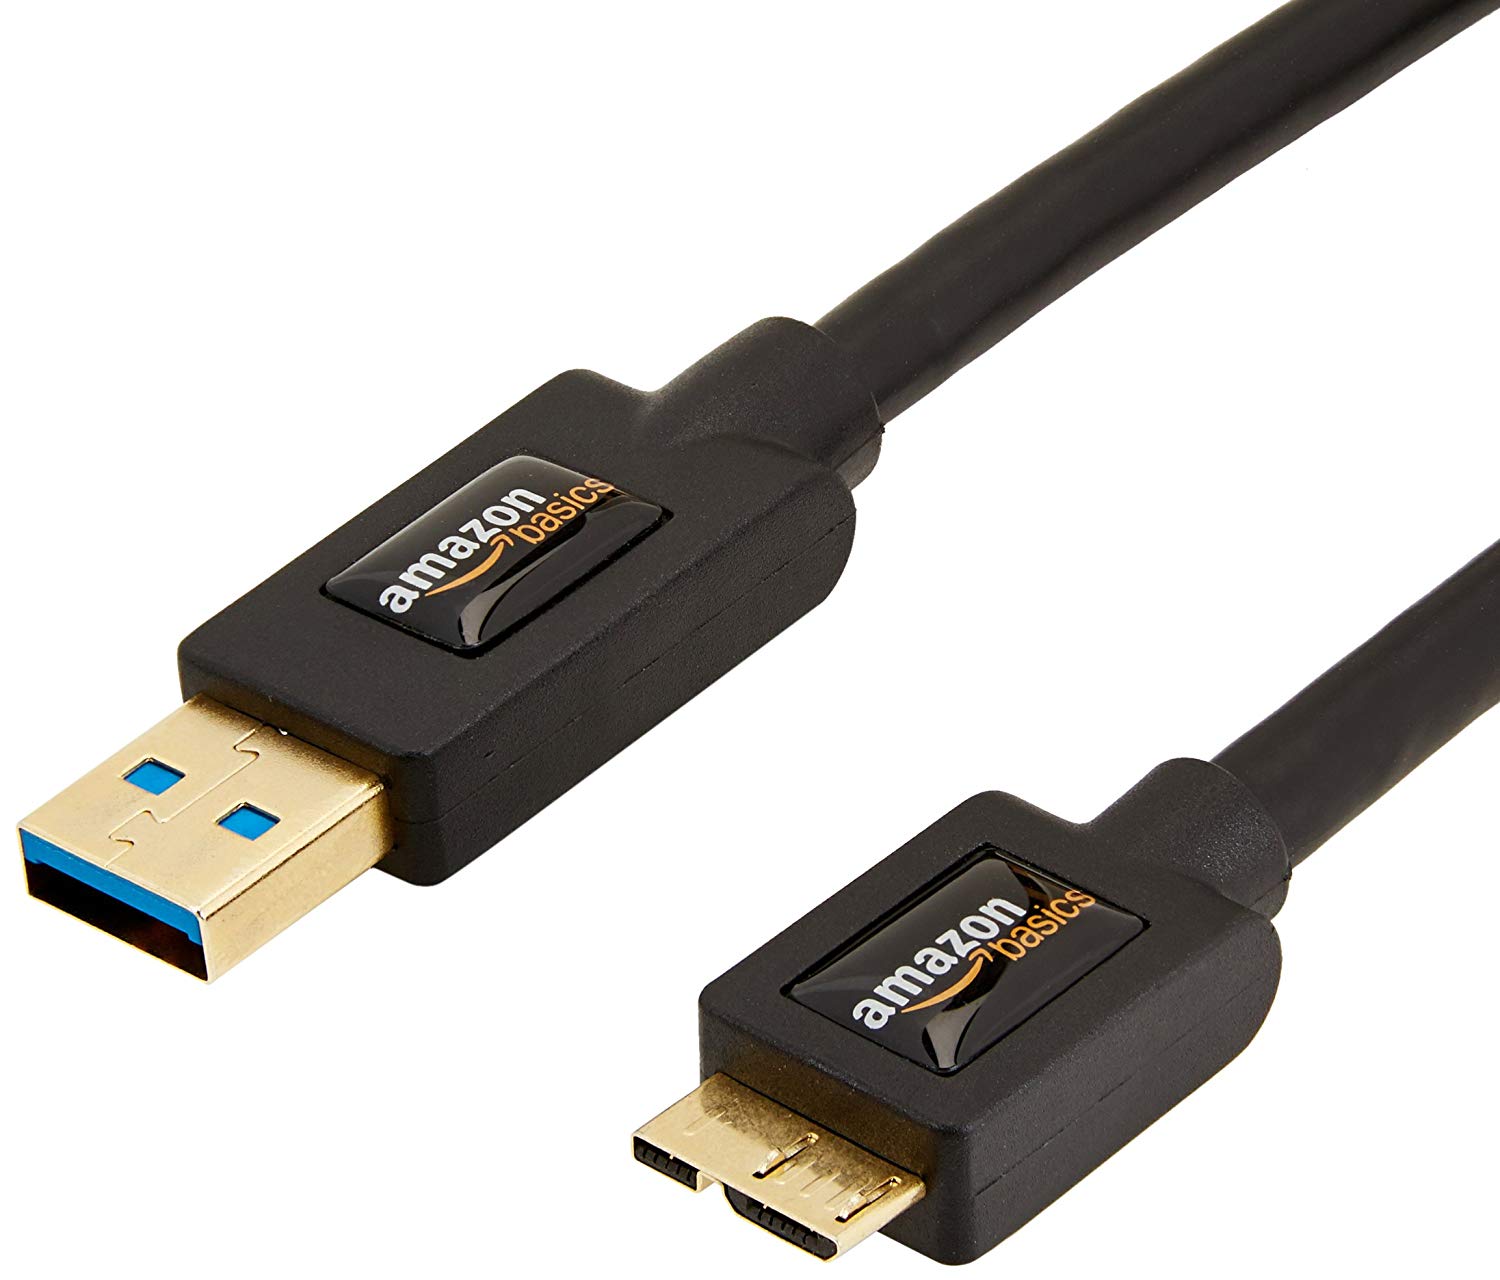 USB 3.0 Cable - A-Male to Micro-B - 3 Feet (0.9 Meters)